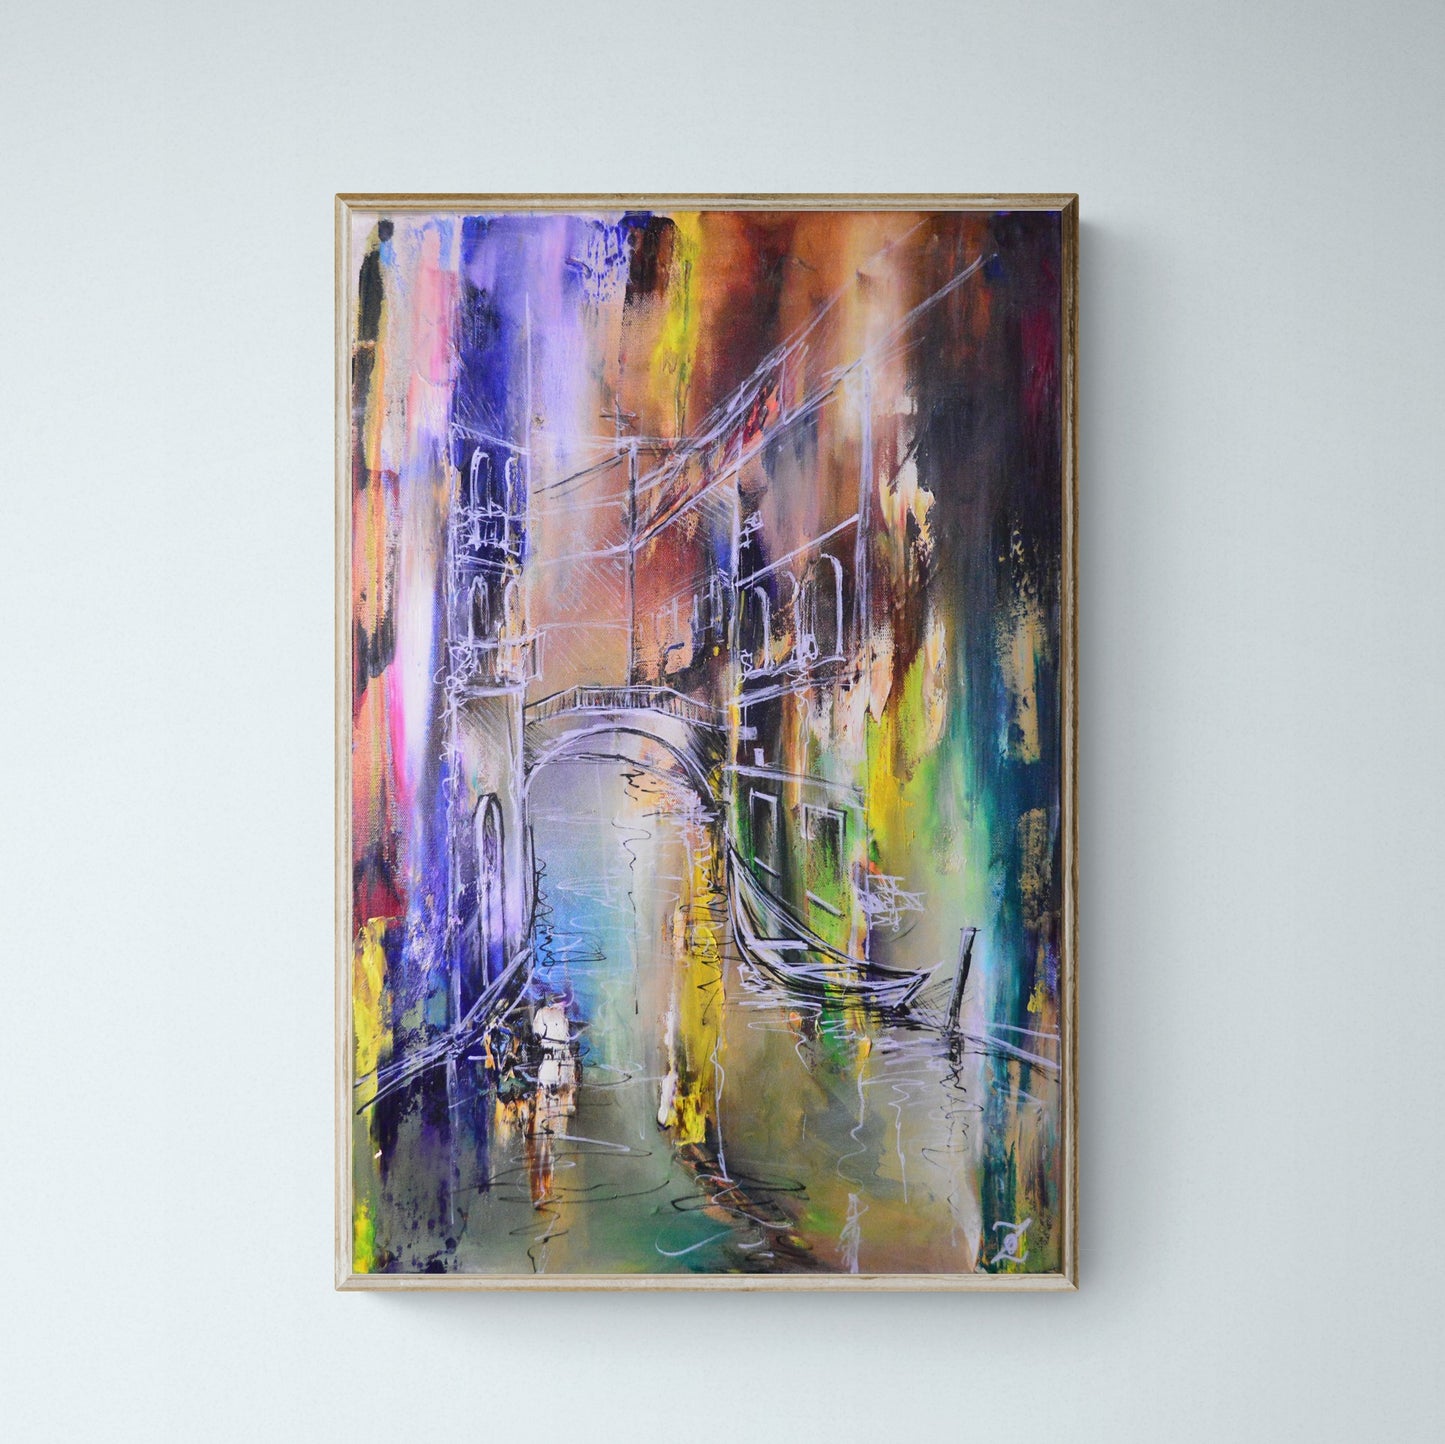 Original Abstract Painting on Canvas 60x40cm "See Through"